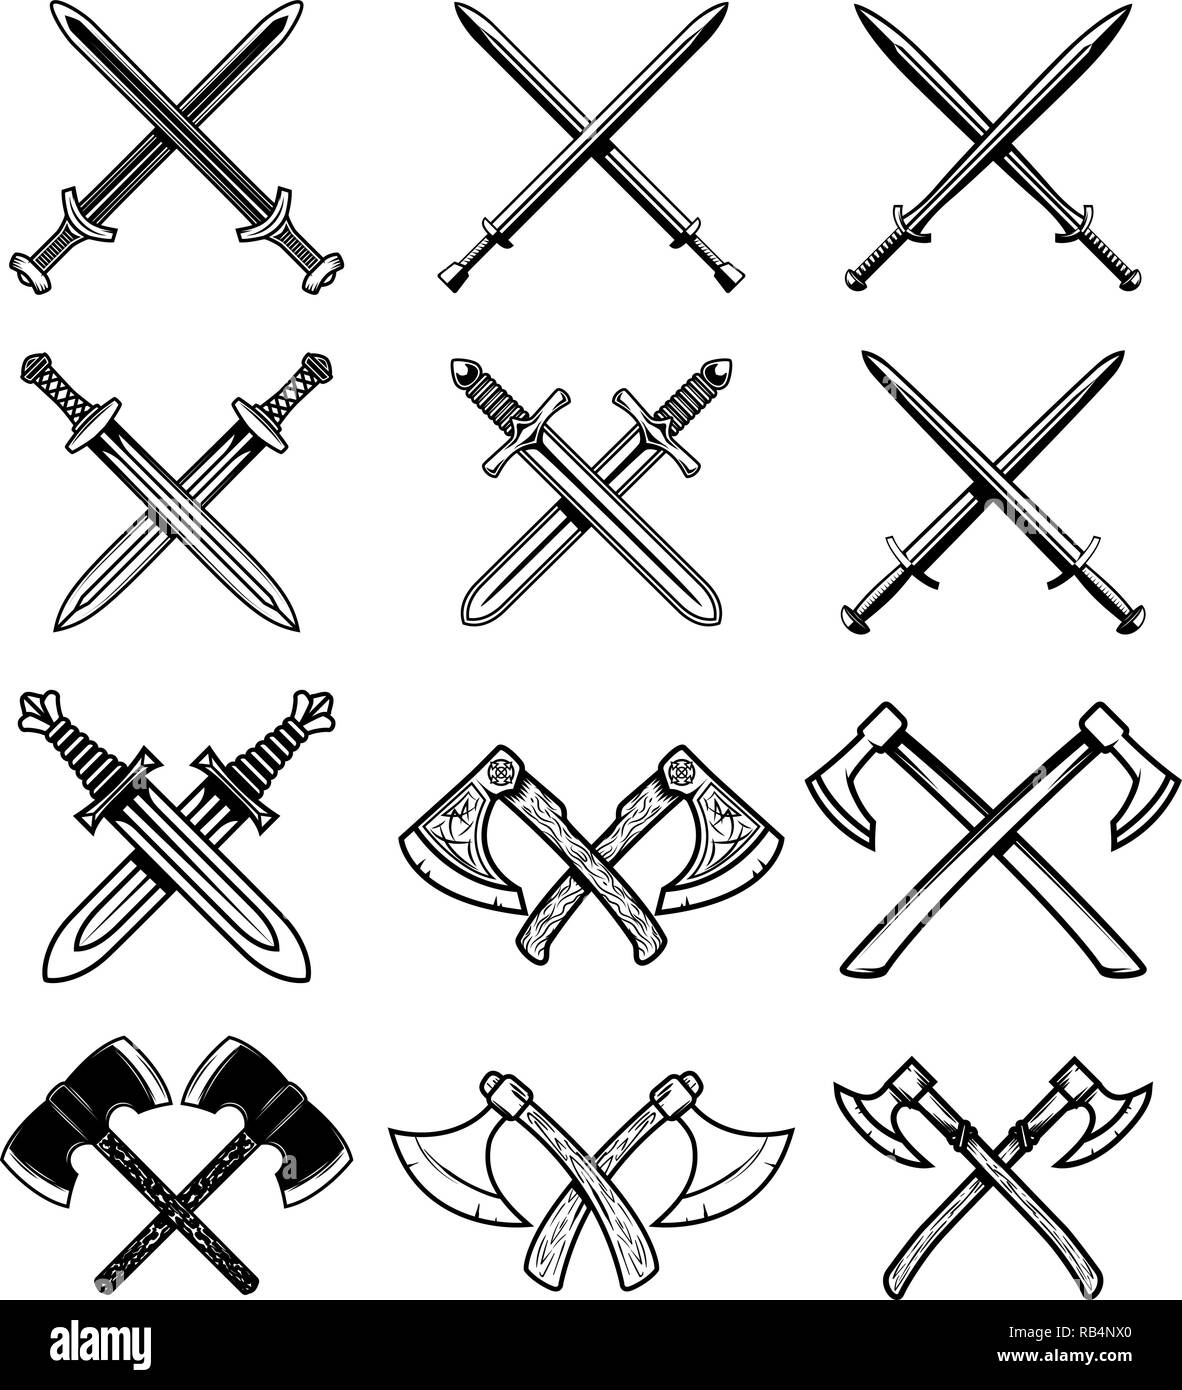 Set of ancient weapon. Knight swords, axes. Design element for logo, label, emblem, sign. Vector illustration Stock Vector